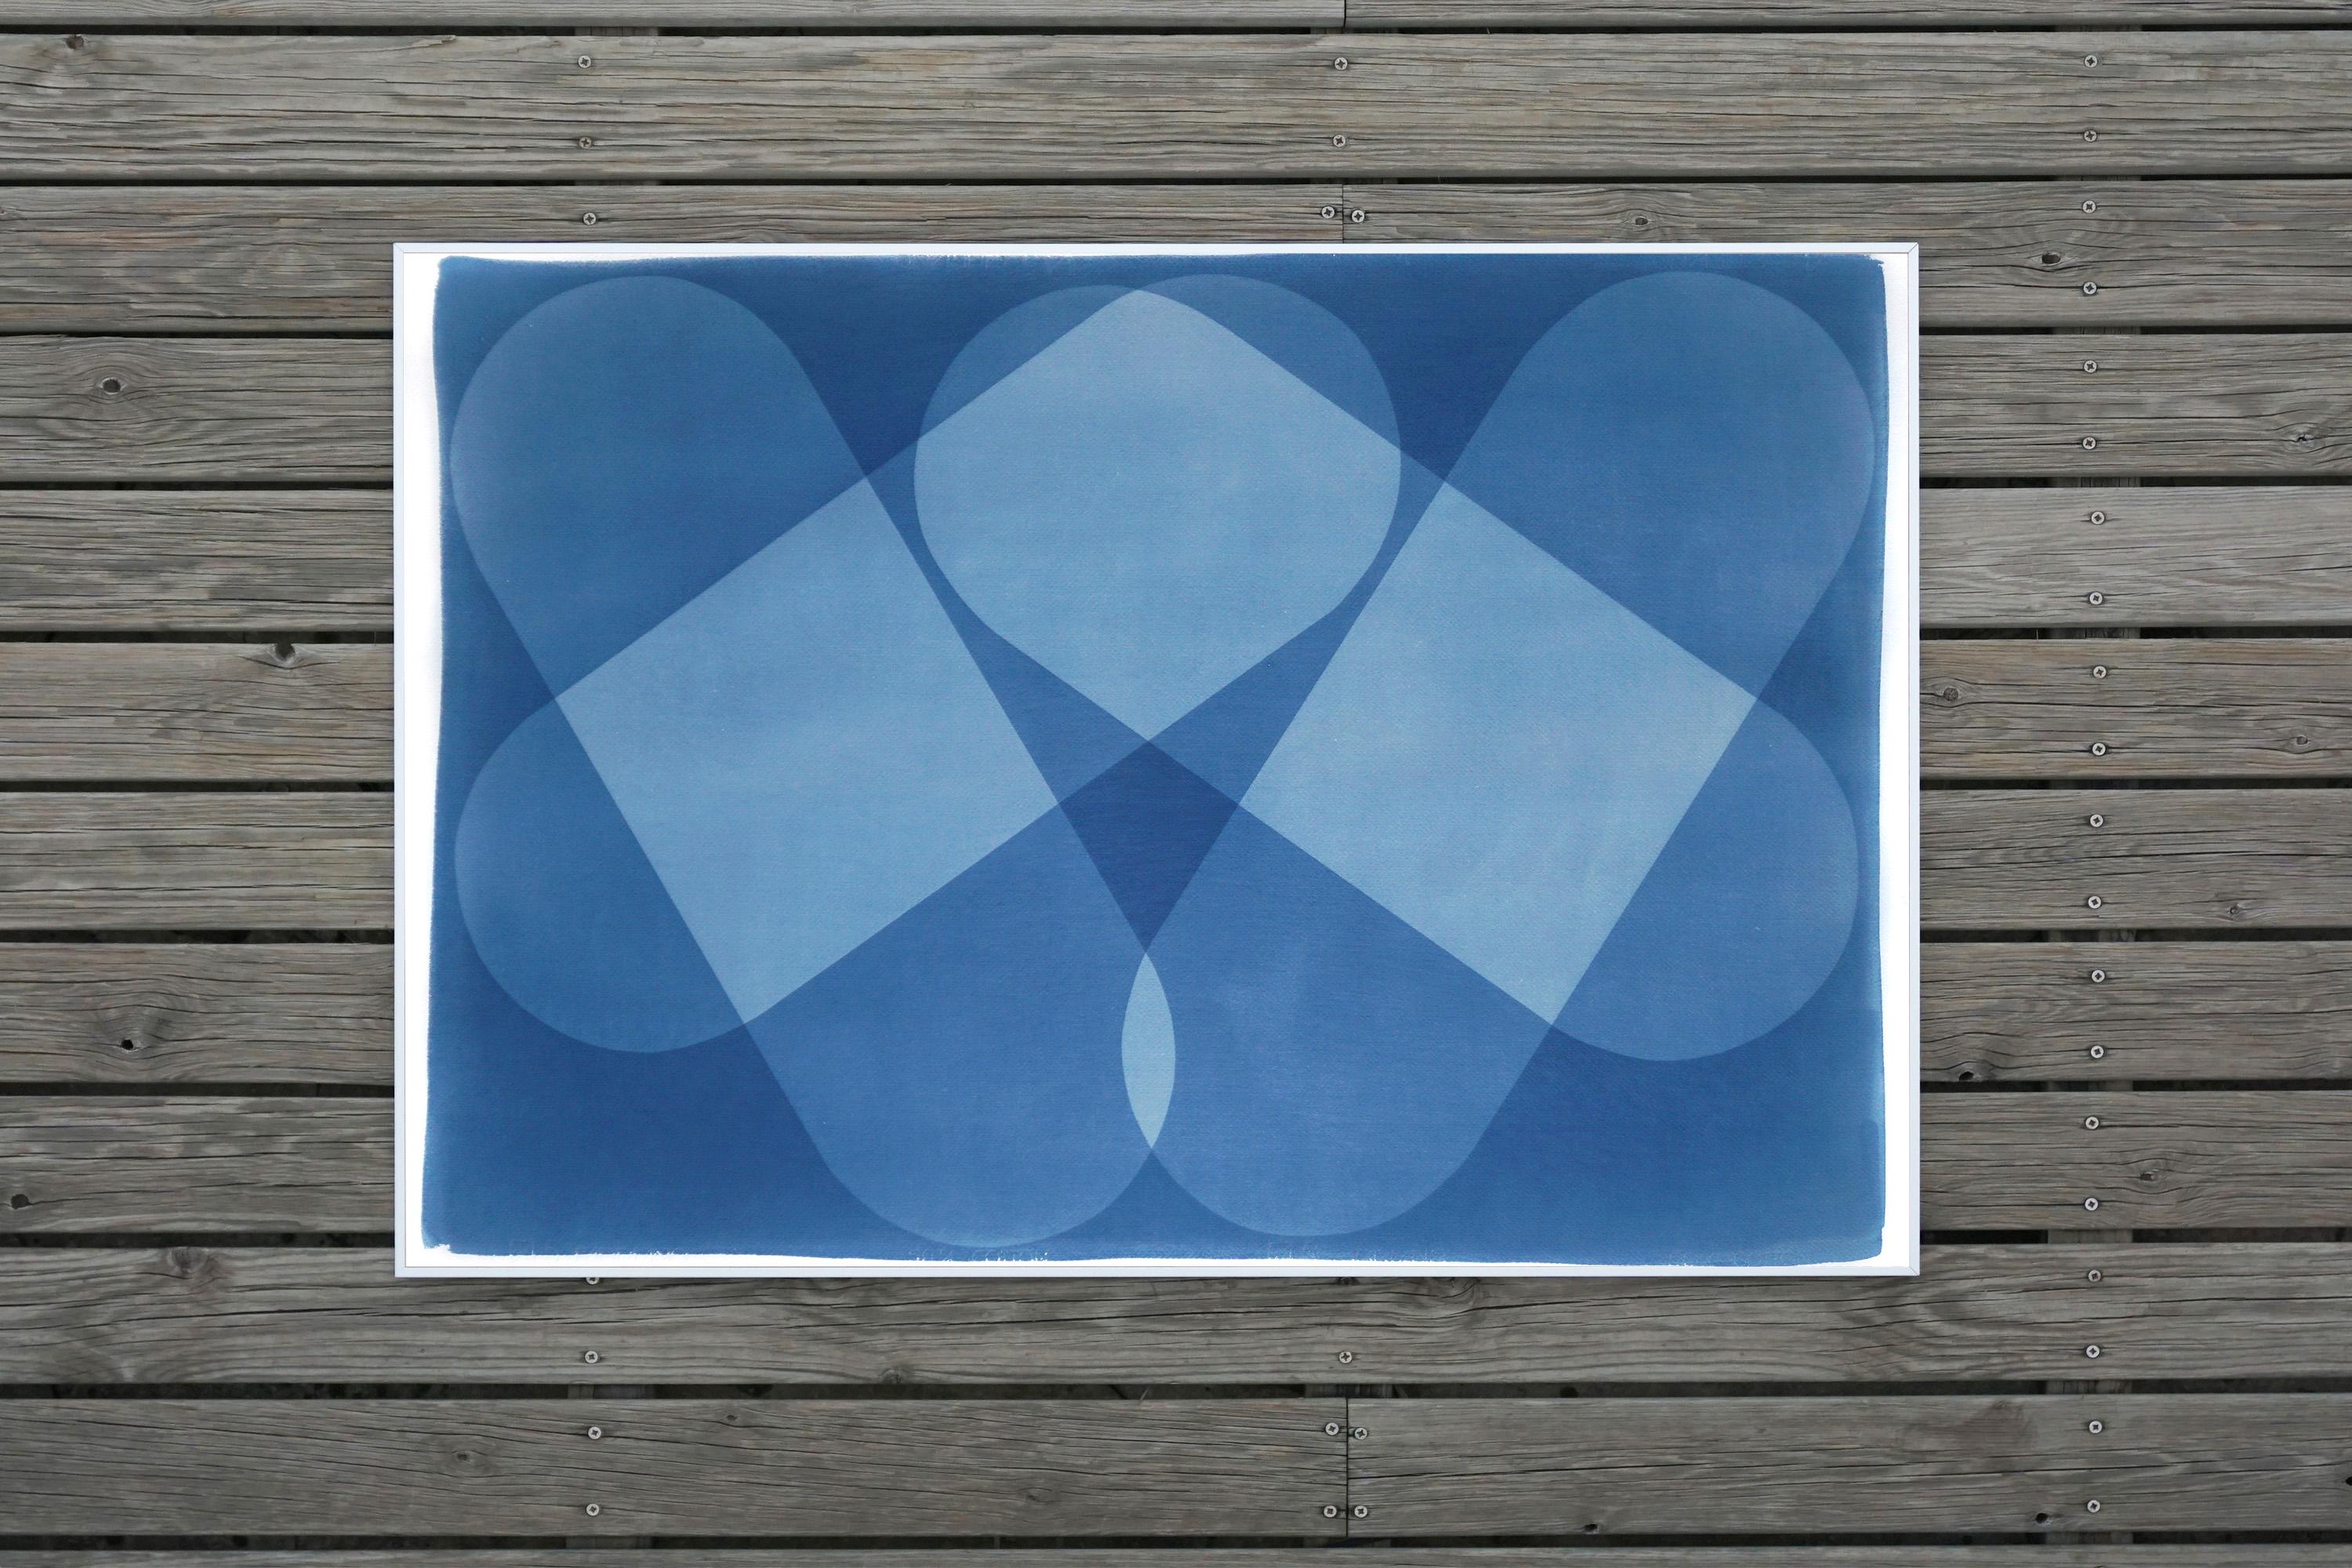 This is an exclusive handprinted unique cyanotype that takes its inspiration from the mid-century modern shapes.
It's made by layering paper cutouts and different exposures using uv-light. 

Details:
+ Title: Symmetrical Icon
+ Year: 2022
+ Stamped